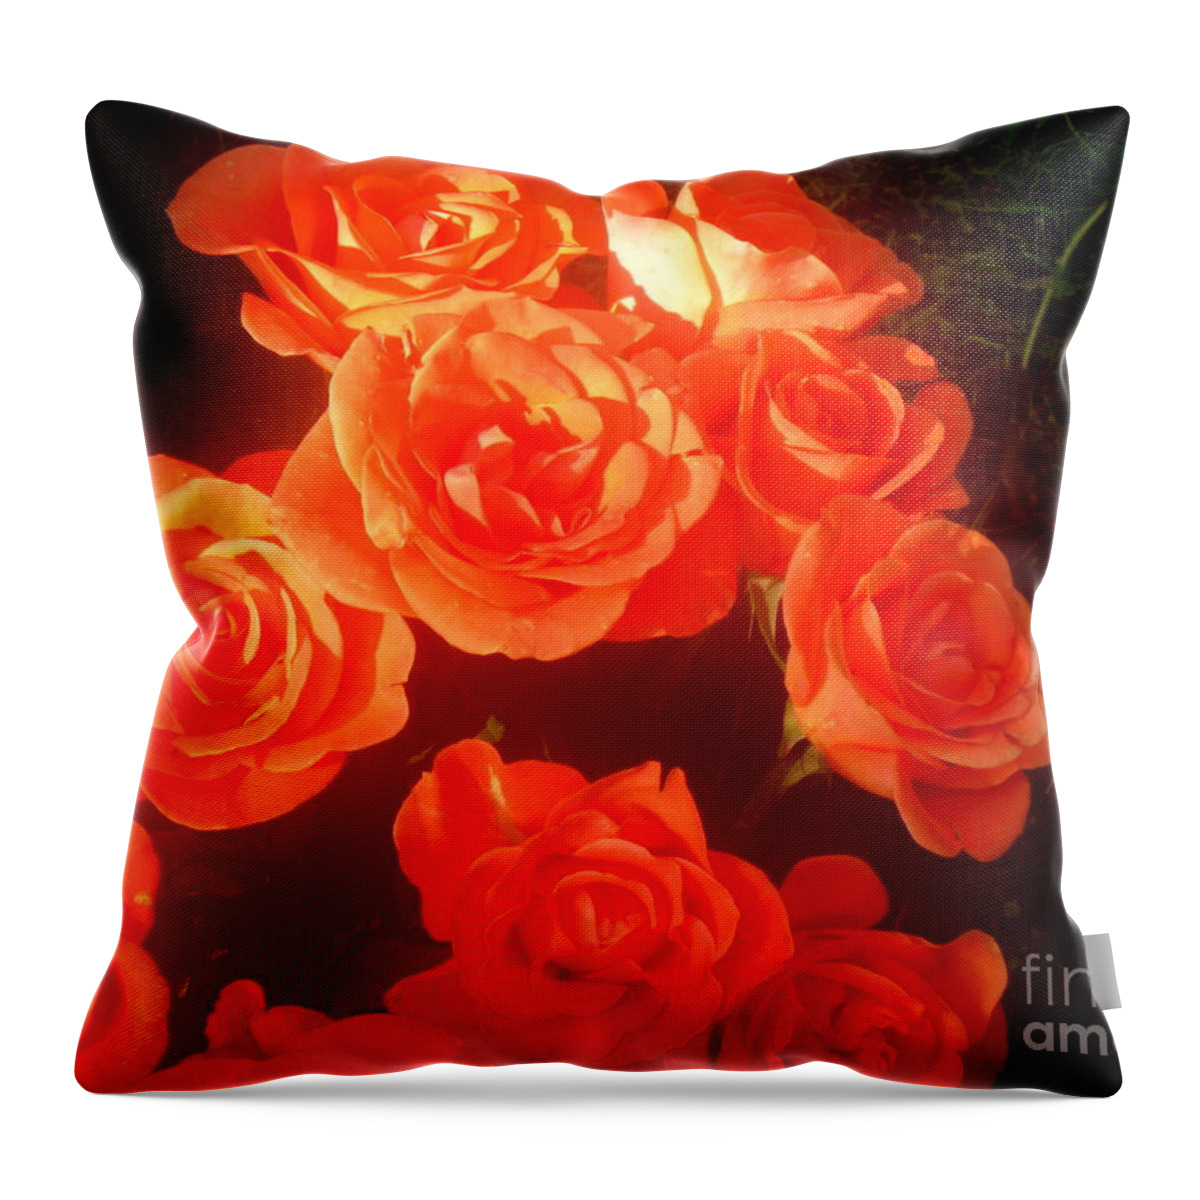 Beauty Canvas Prints Throw Pillow featuring the digital art Roses by Pauli Hyvonen